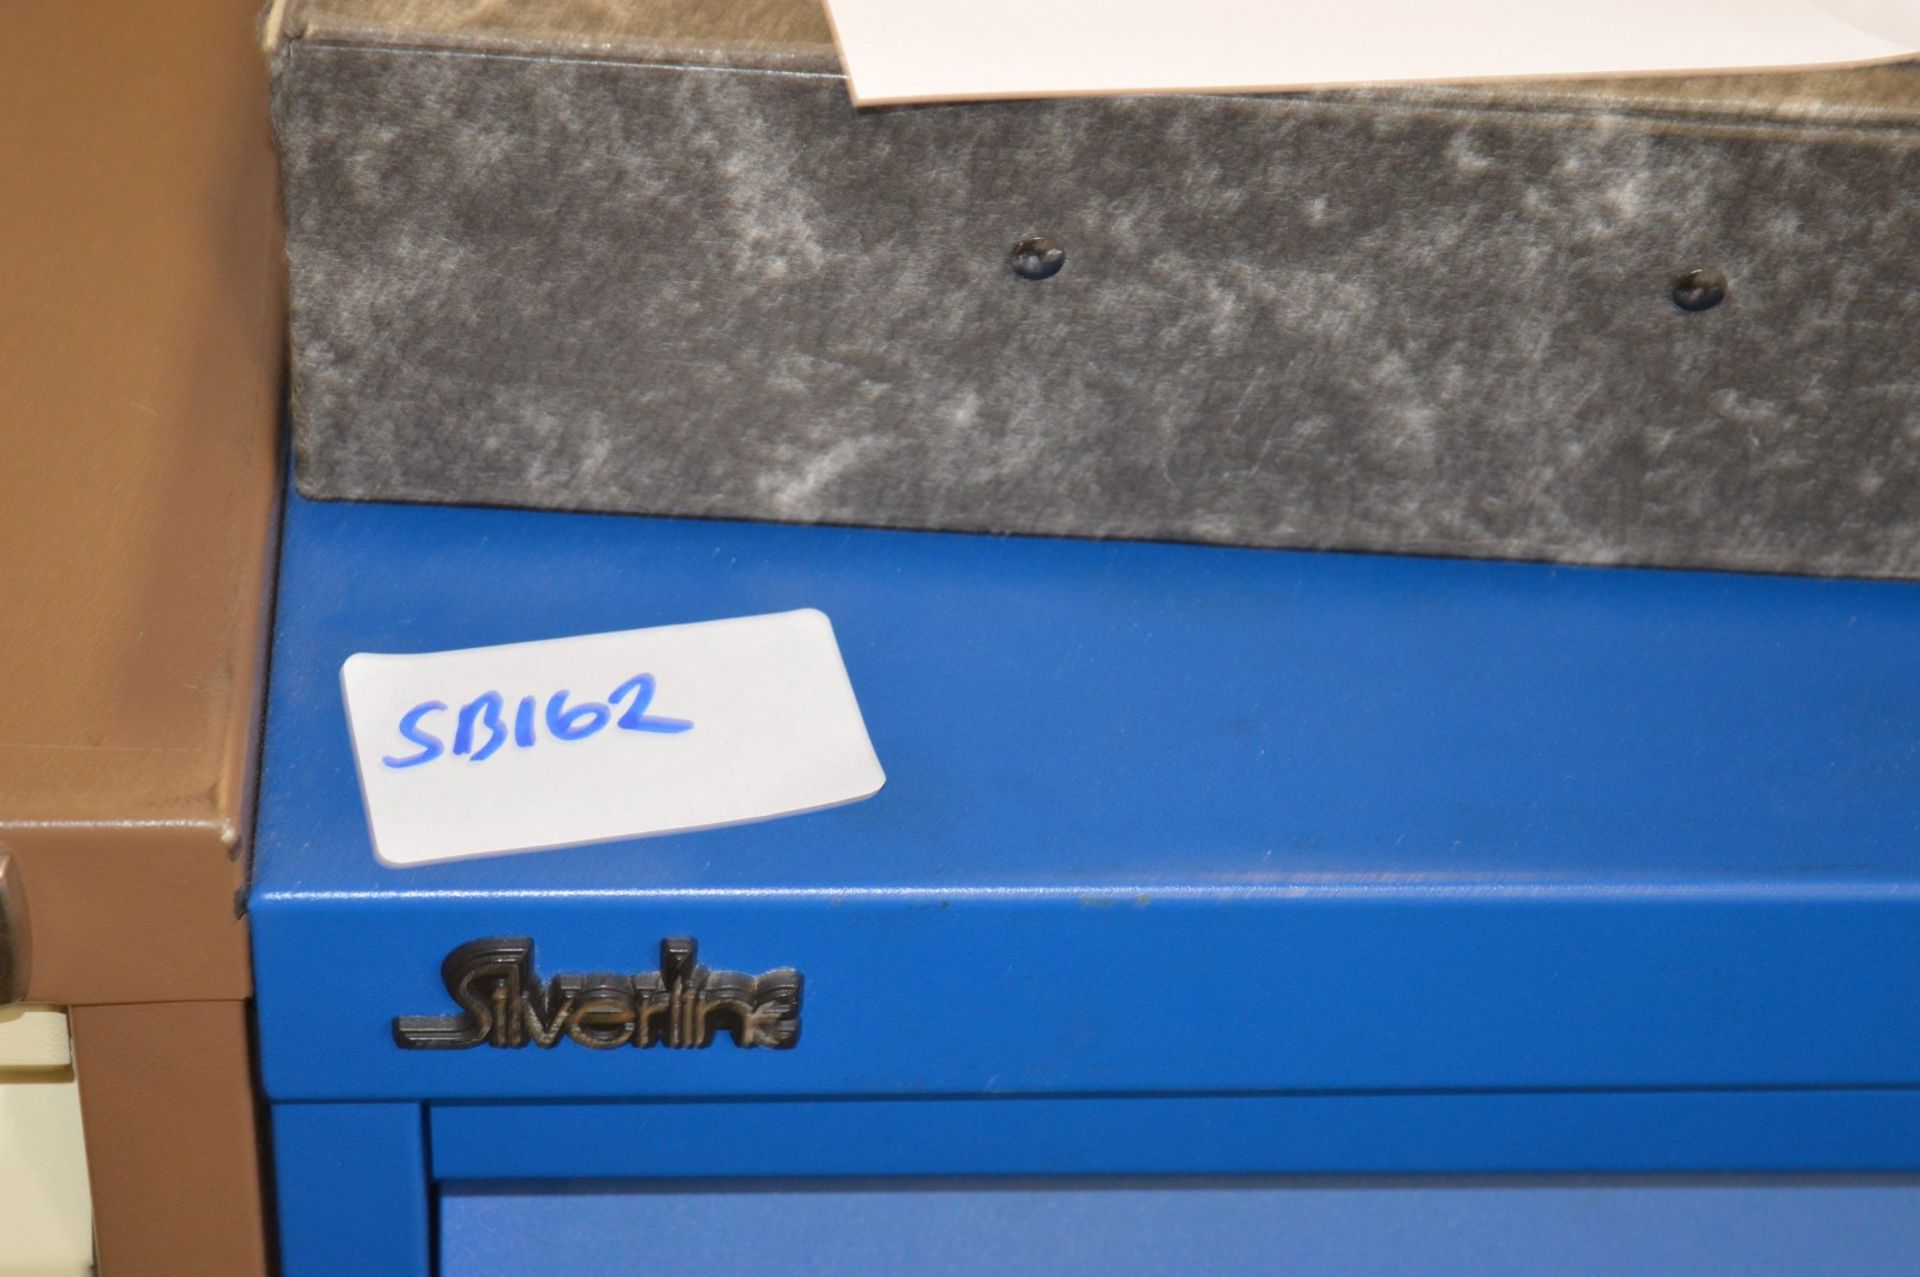 1 x Silverline Three Drawer Filing Cabinet - Includes Key - BLUE - Keep Your Important Documents - Image 3 of 3